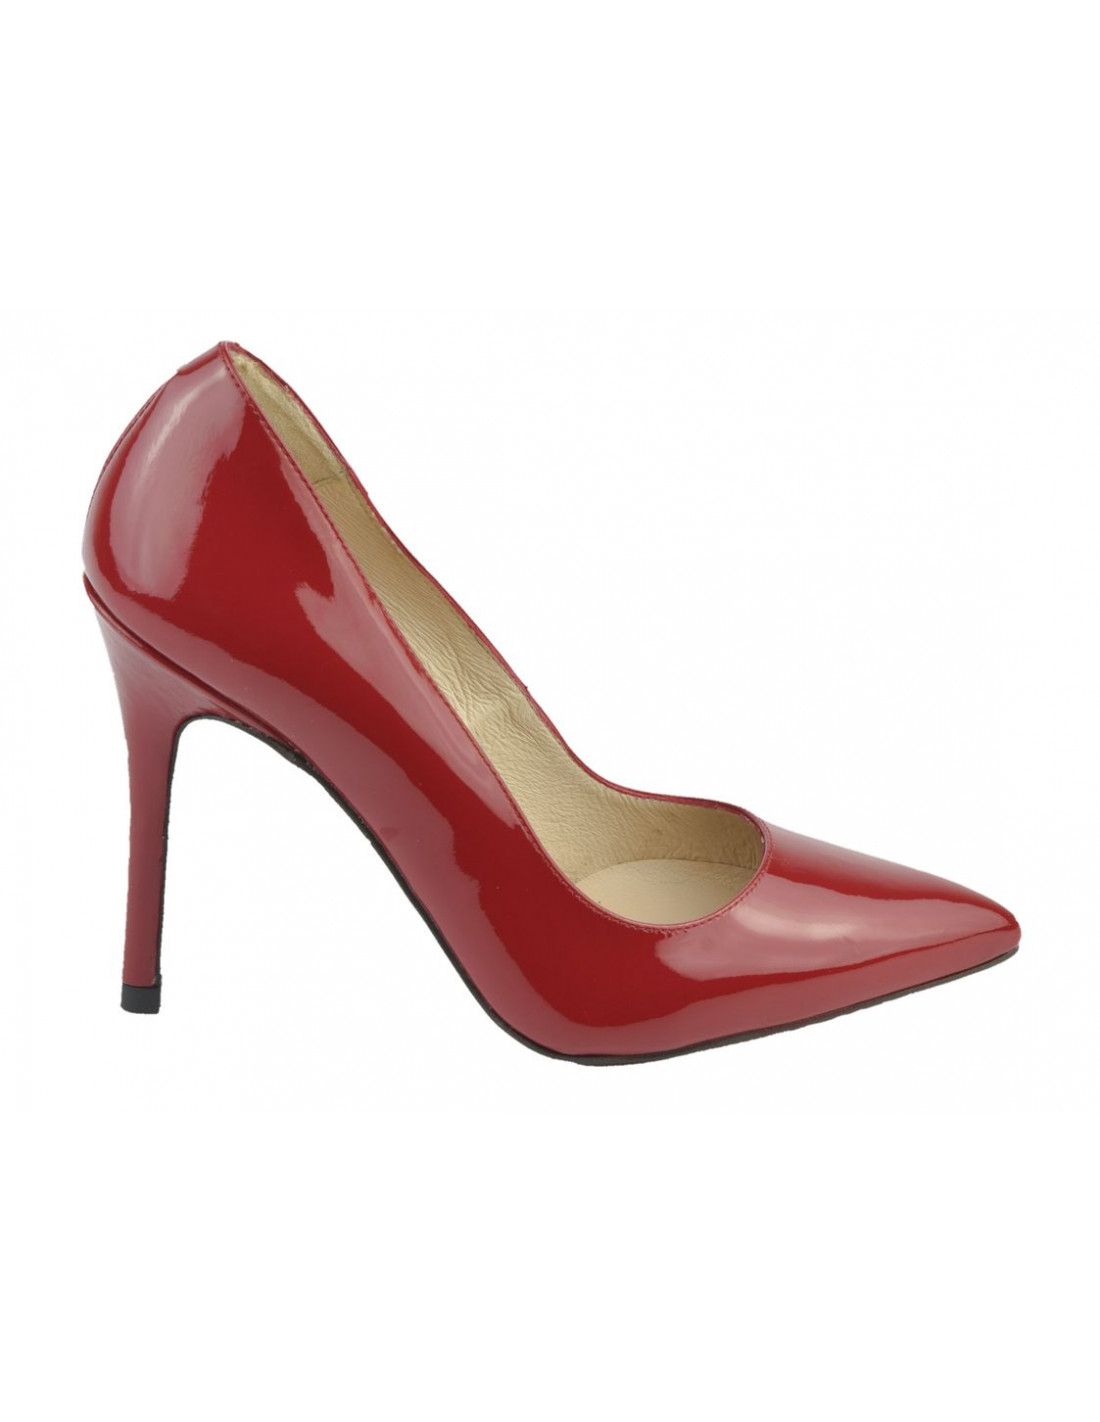 patent leather pointed toe pumps